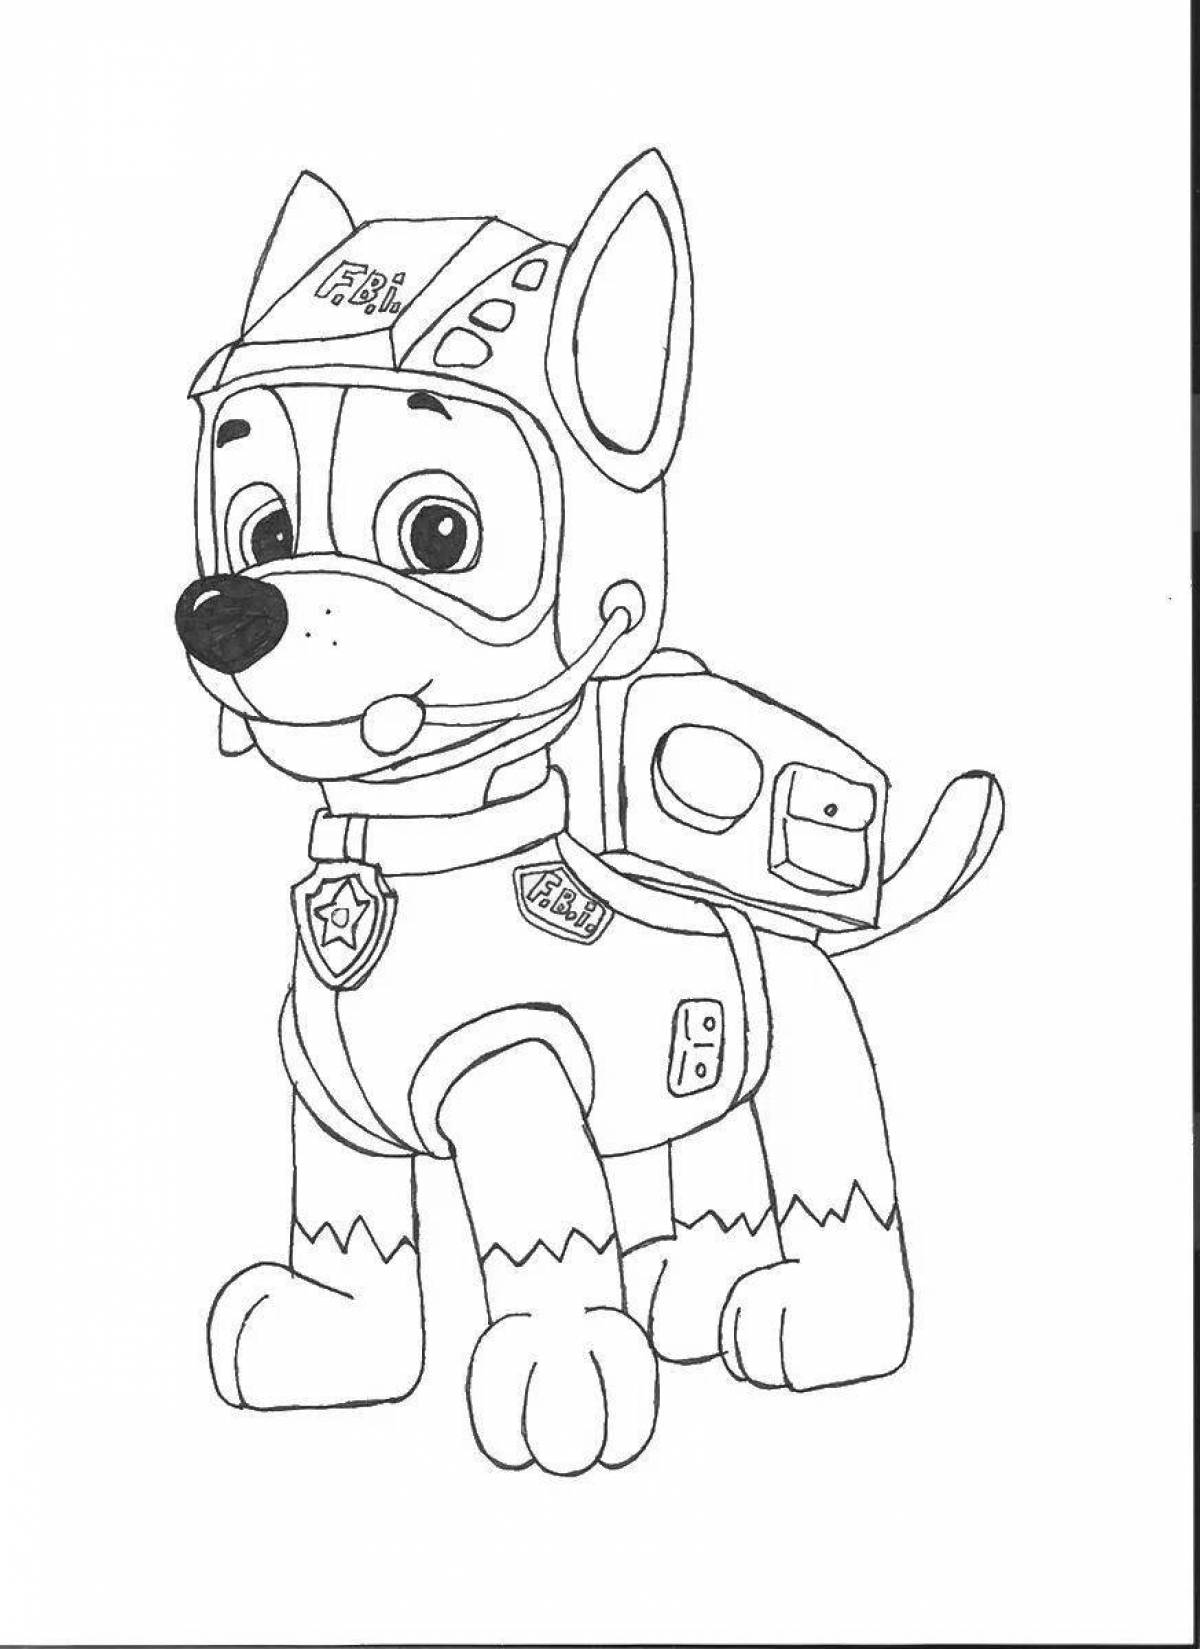 Fantastic racer coloring page for kids